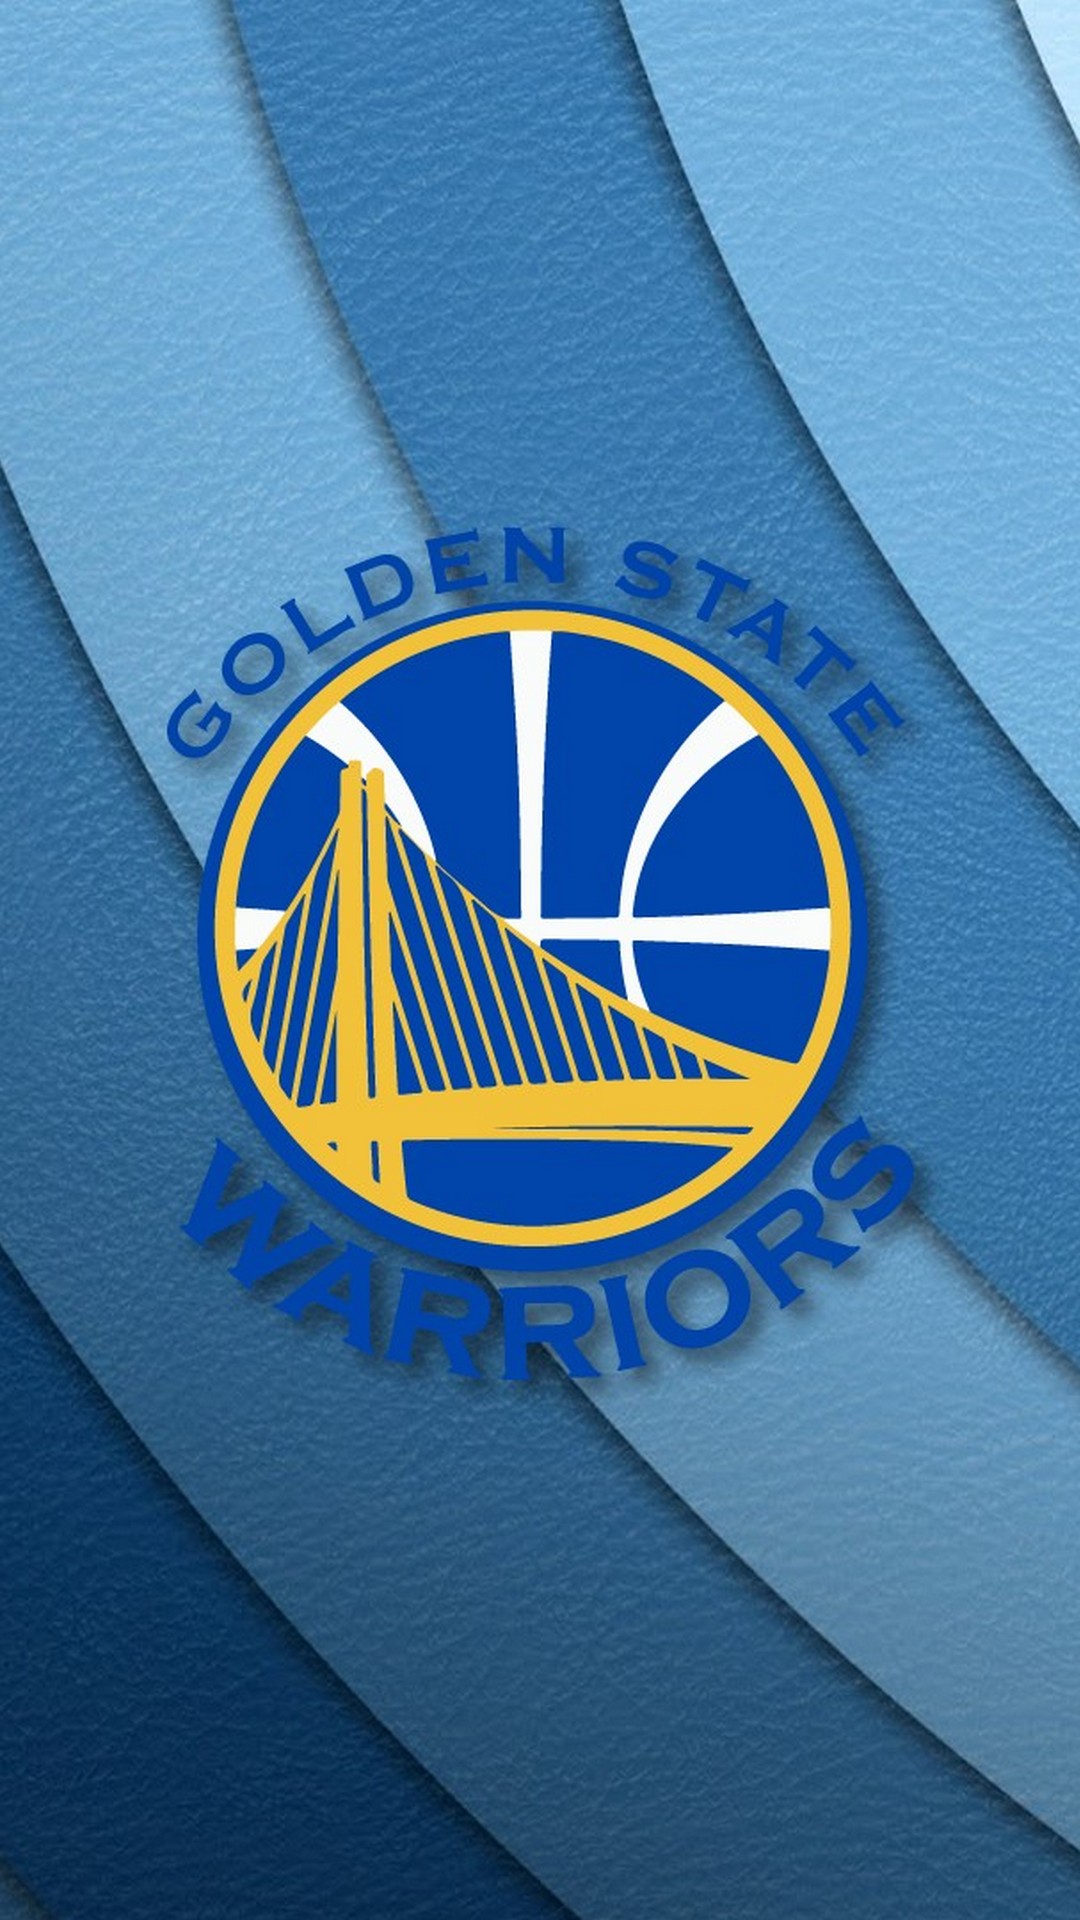 Golden State HD Wallpaper For iPhone with image dimensions 1080x1920 pixel. You can make this wallpaper for your Desktop Computer Backgrounds, Windows or Mac Screensavers, iPhone Lock screen, Tablet or Android and another Mobile Phone device